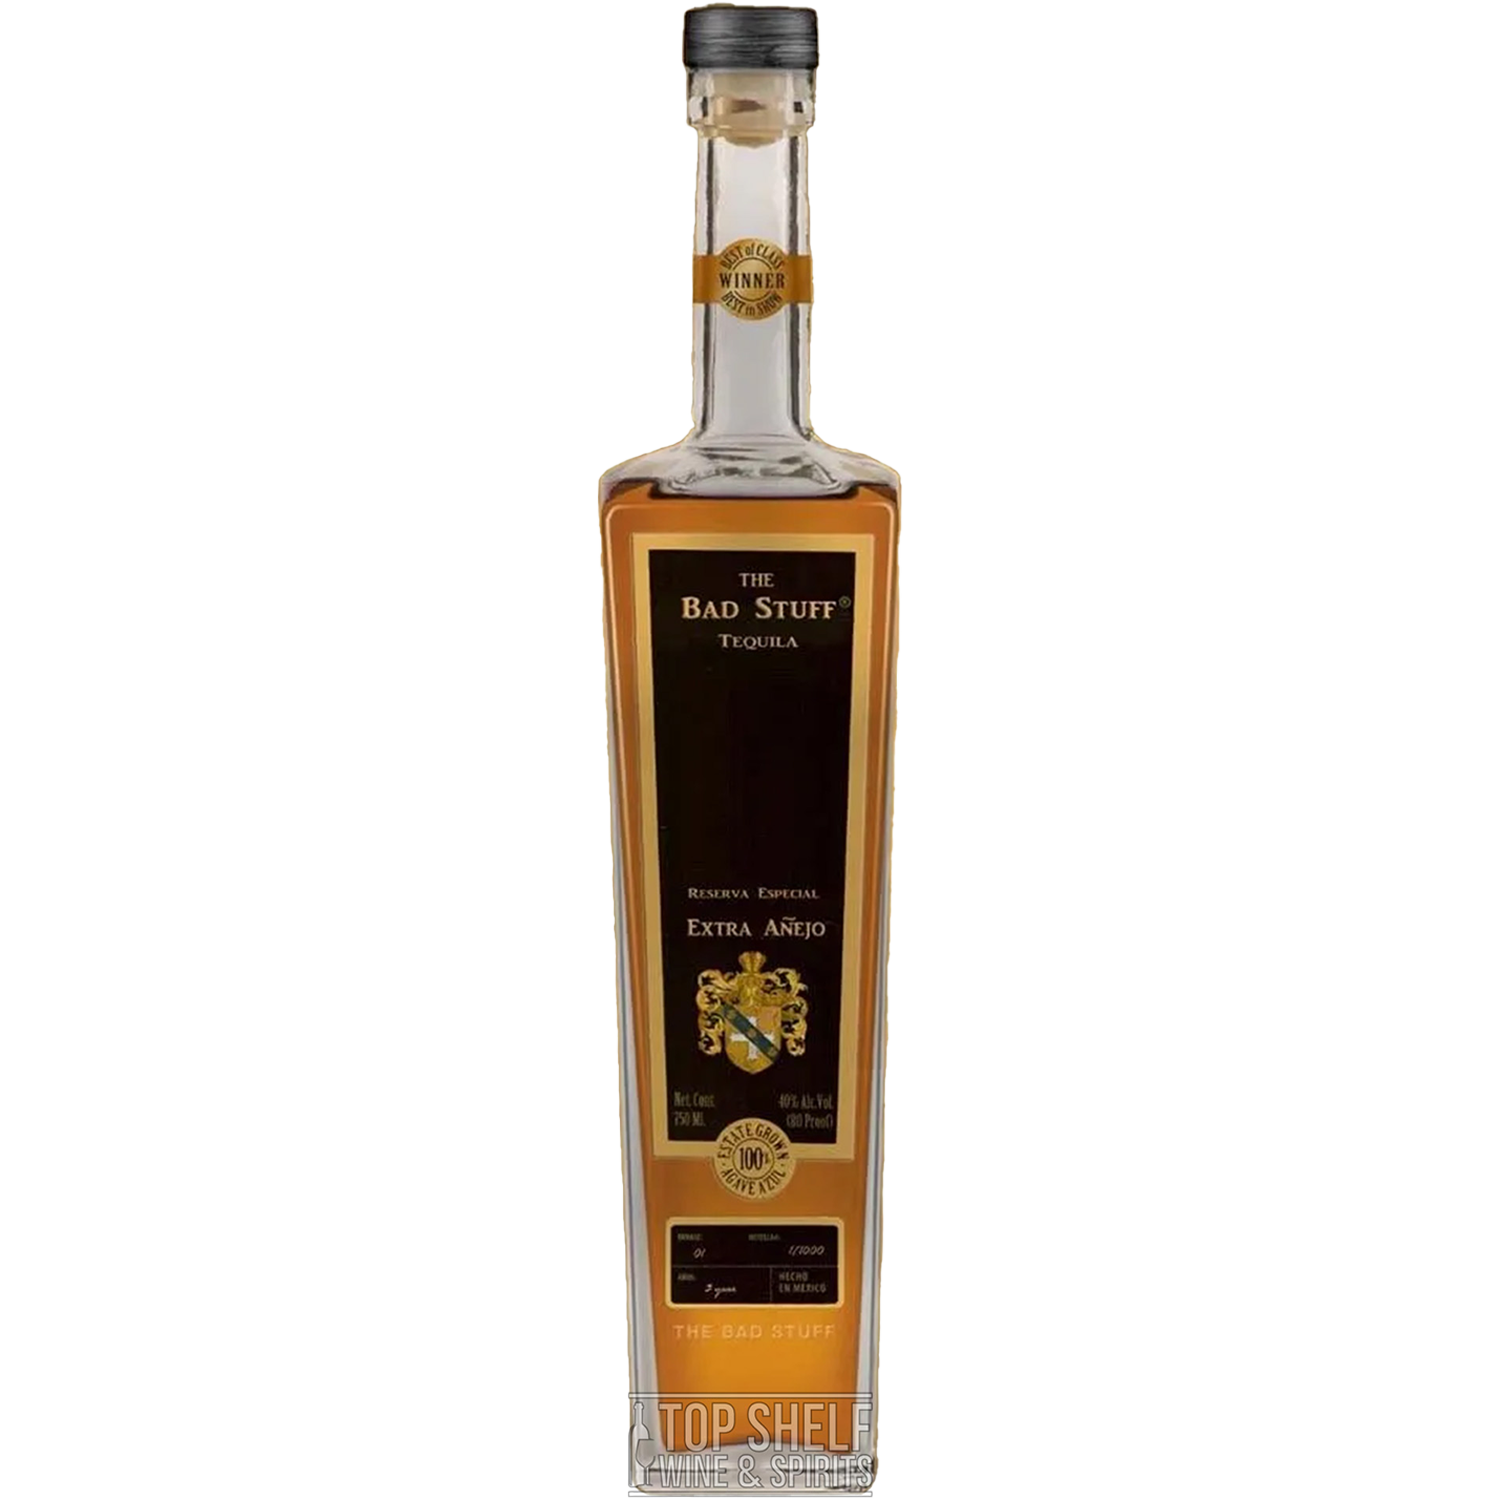 The Bad Stuff Reserva Especial 3 Year Extra Añejo Tequila